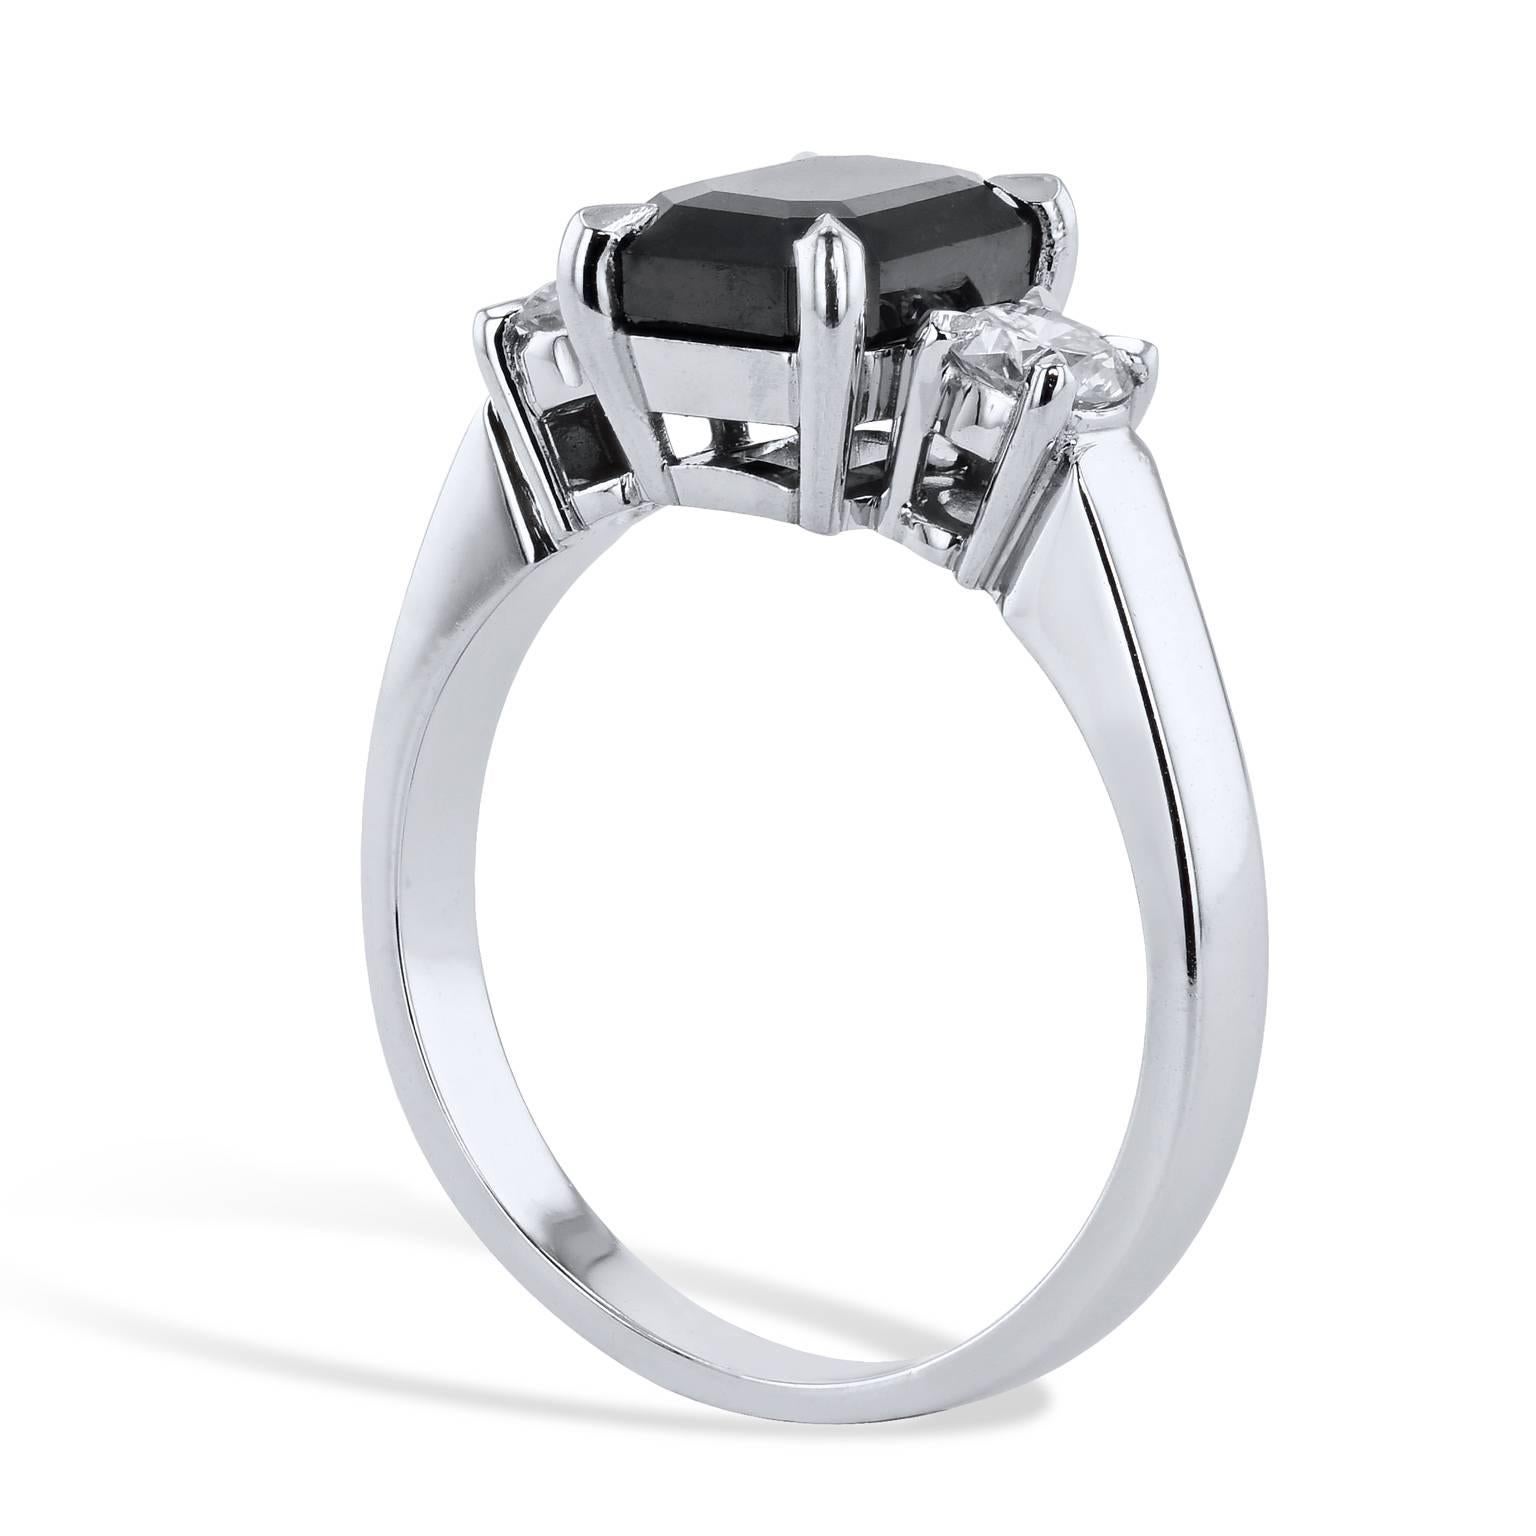 This handmade black and white diamond engagement ring conjures the thought of the night sky punctuated by starlight. A  2.34 carat emerald cut black diamond is four-prong set at center and feature 0.40 carat of accent diamonds (H/I/I1) on both sides